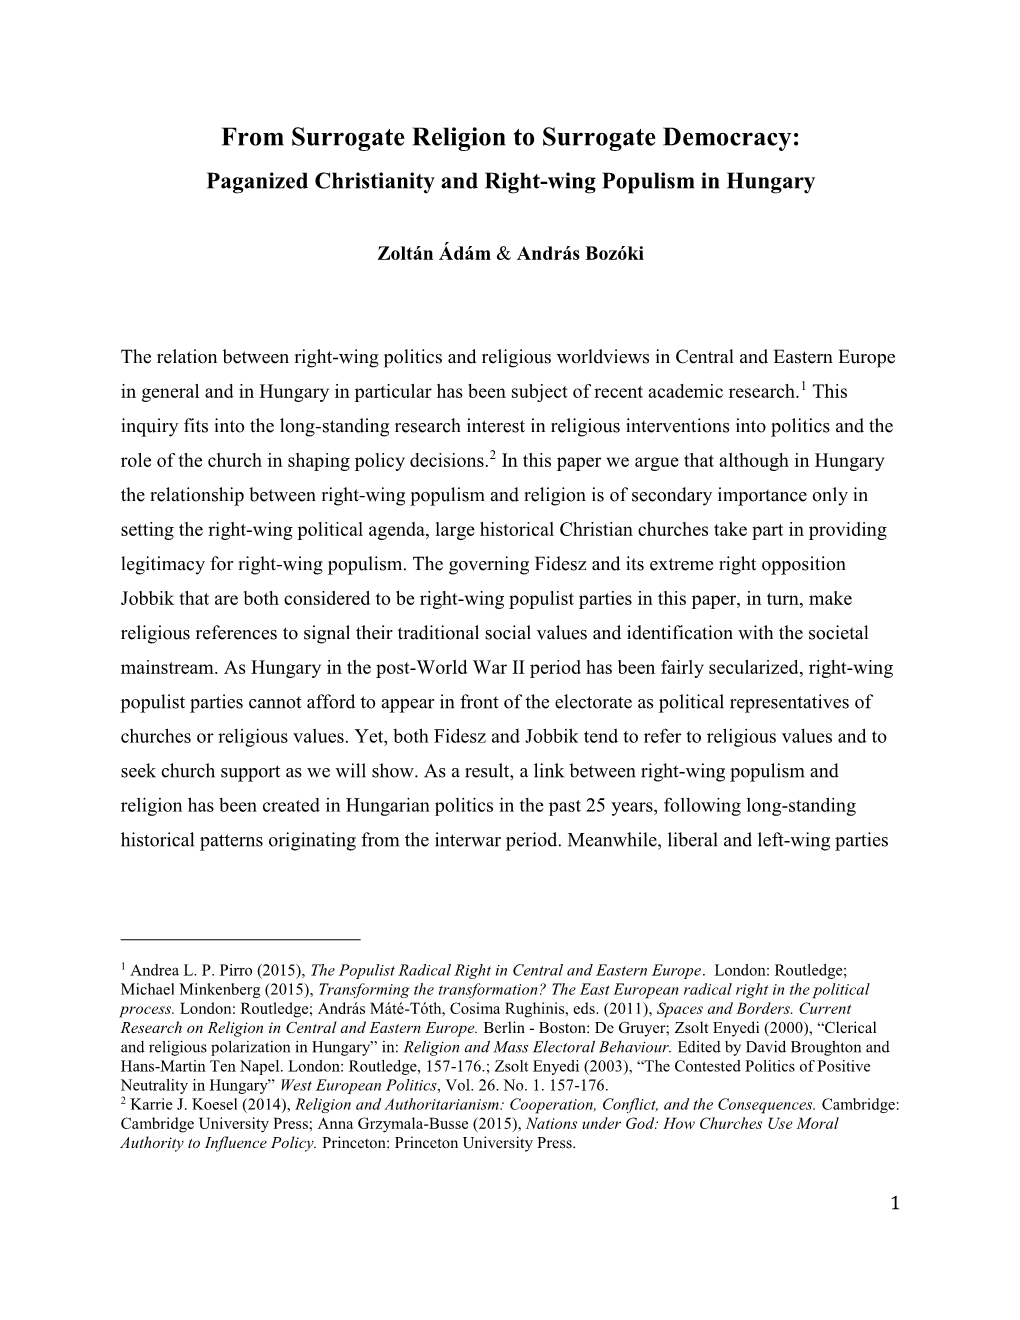 From Surrogate Religion to Surrogate Democracy: Paganized Christianity and Right-Wing Populism in Hungary